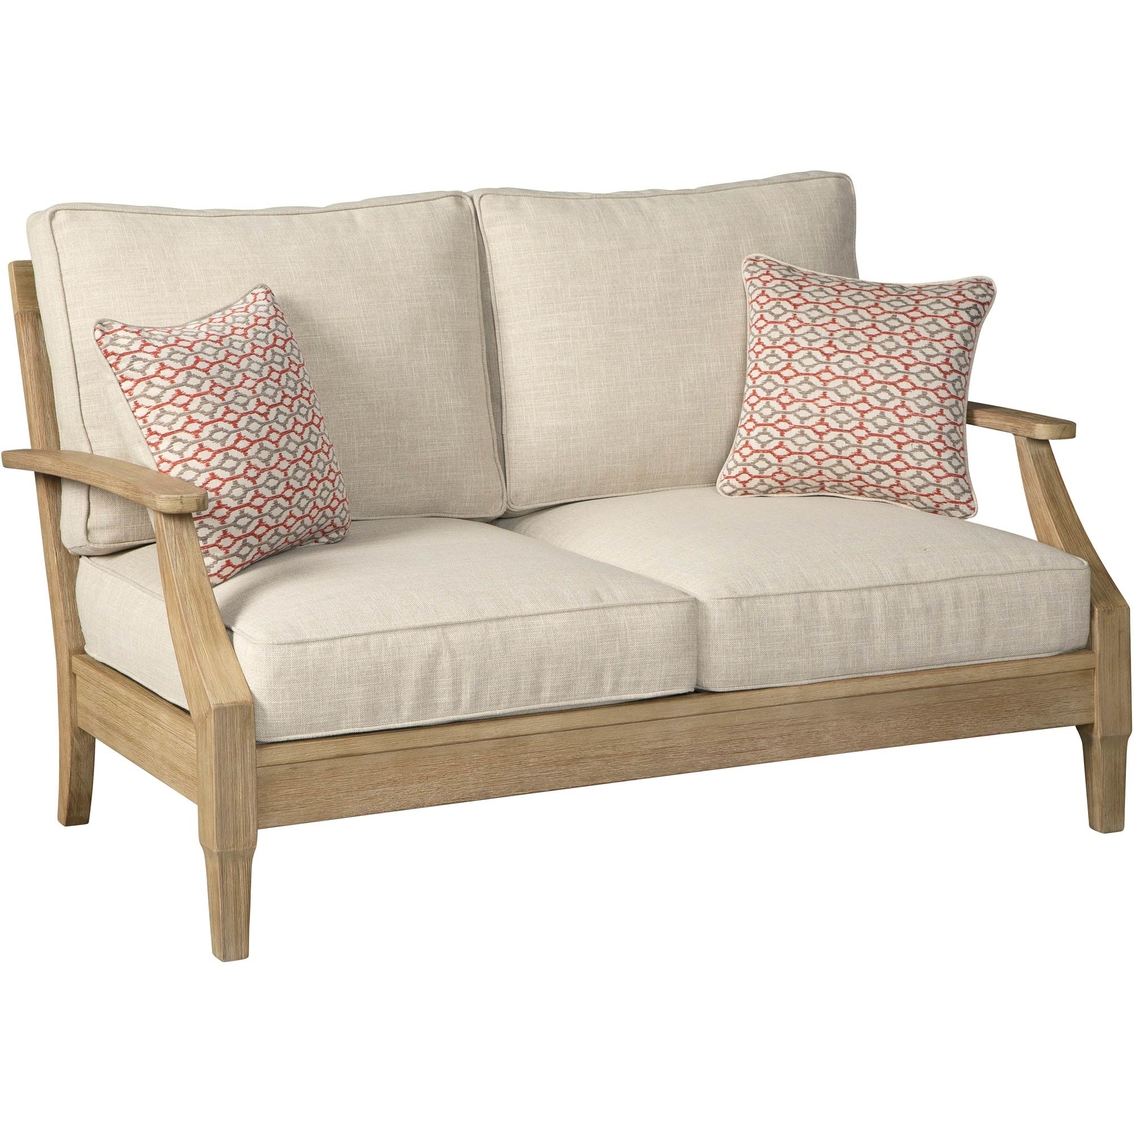 Signature Design by Ashley Clare View 4 pc. Outdoor Sofa and Loveseat Set - Image 4 of 7